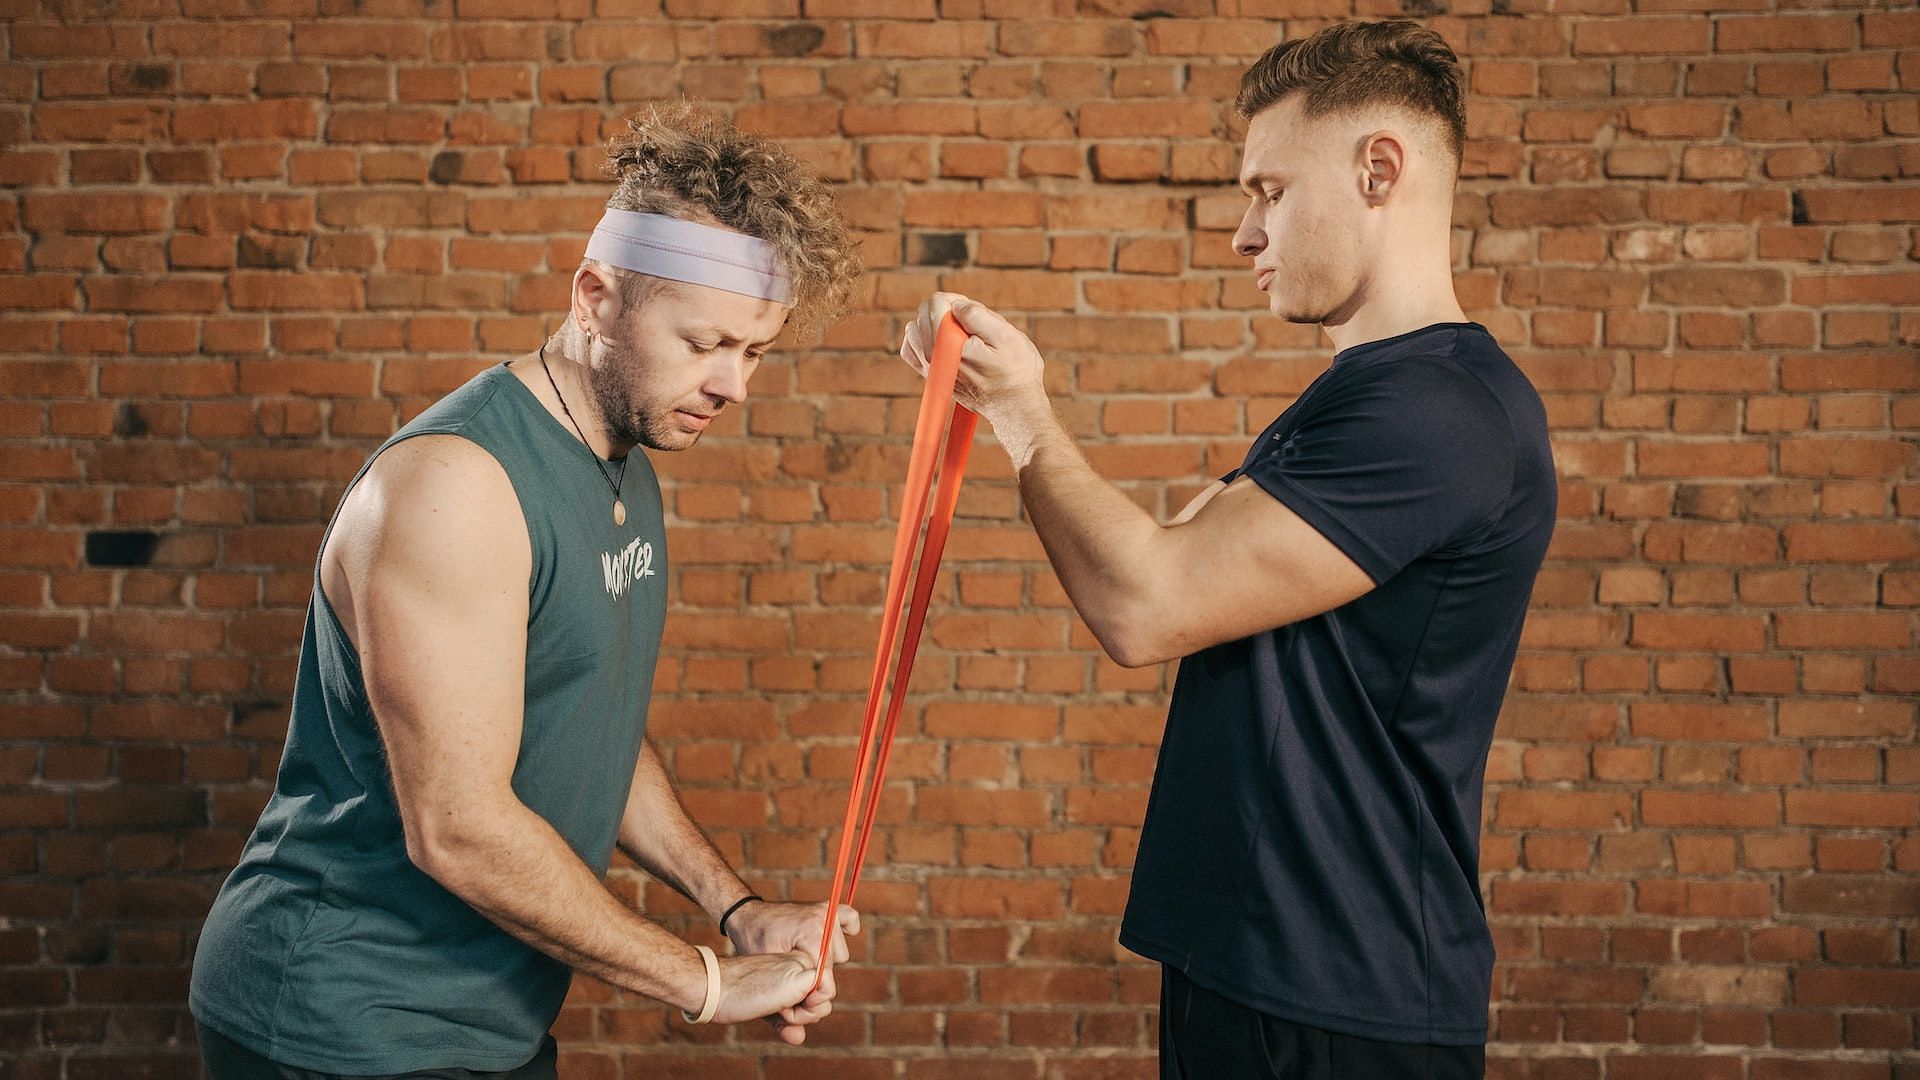 You can use resistance bands to sculpt your muscles. Image via Pexels/Pavel Danilyuk